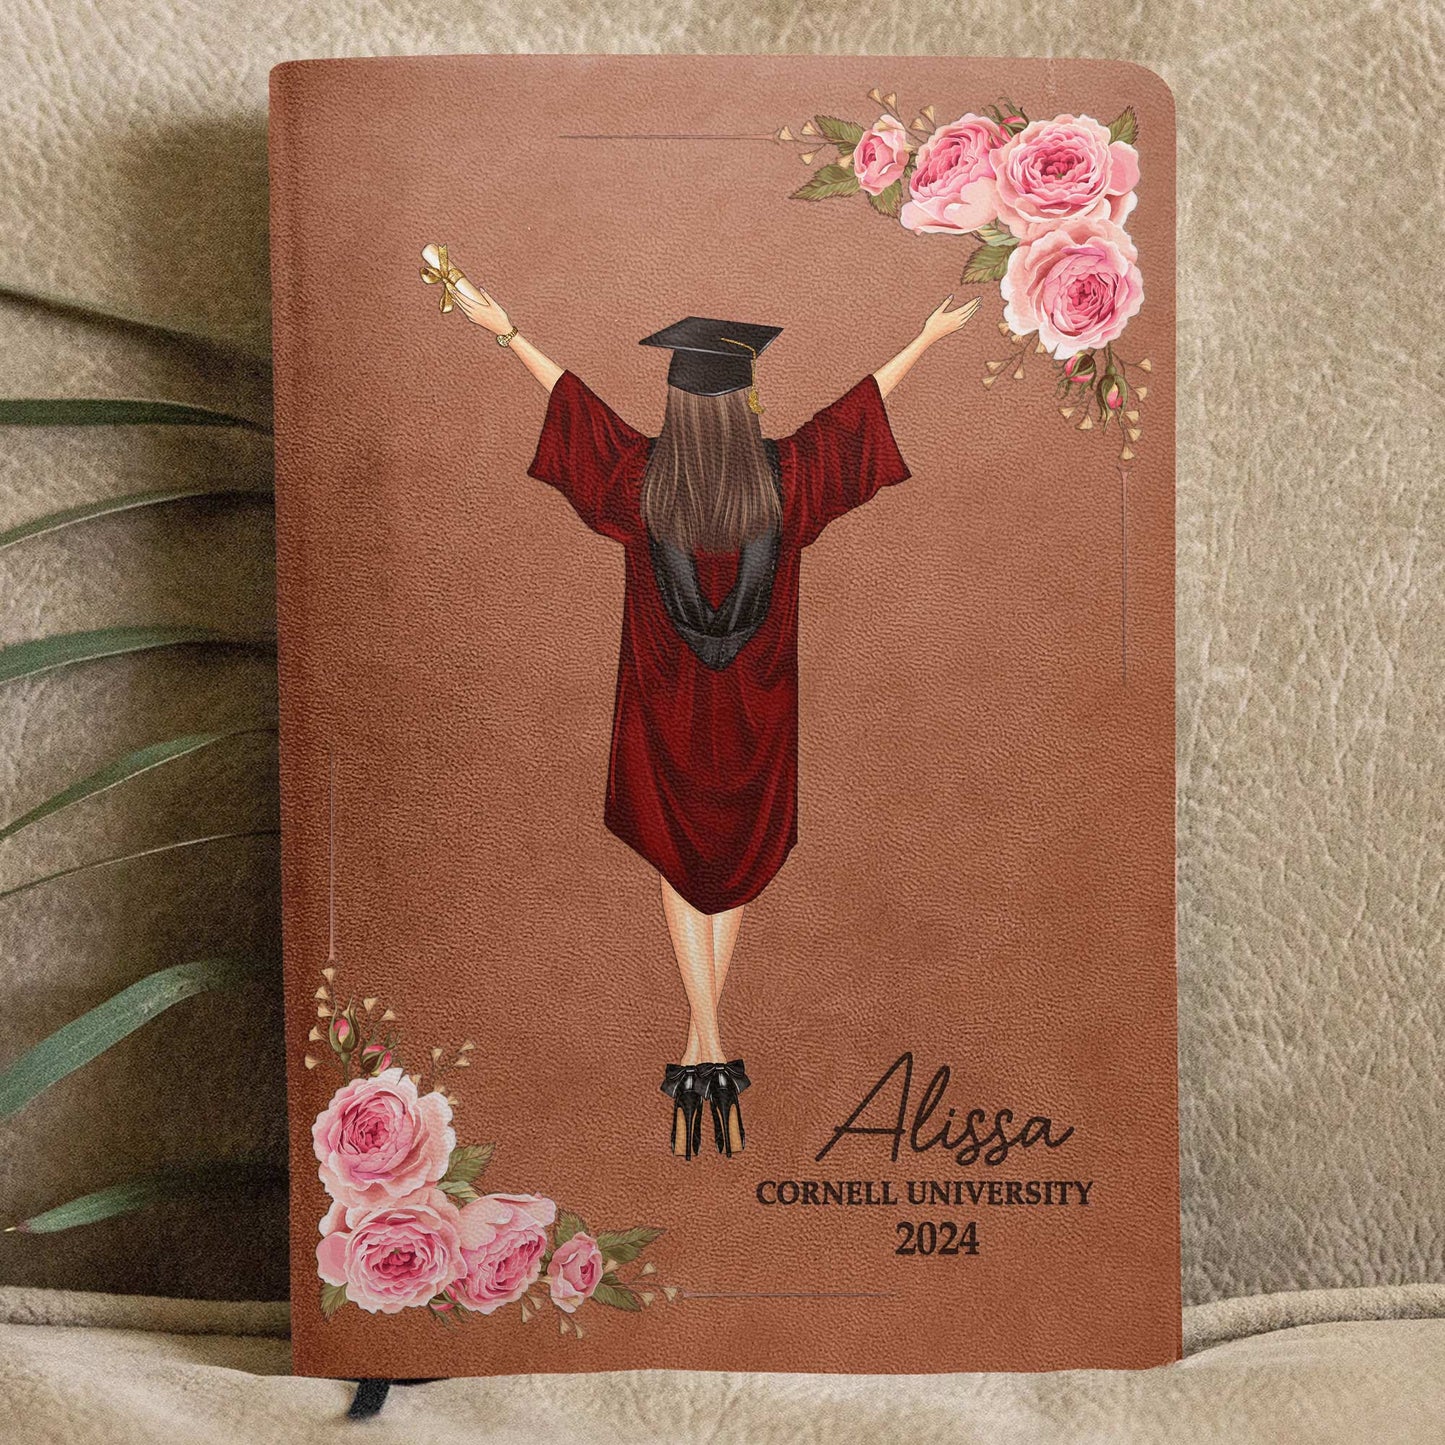 A Sweet Ending To A New Beginning - Personalized Leather Journal